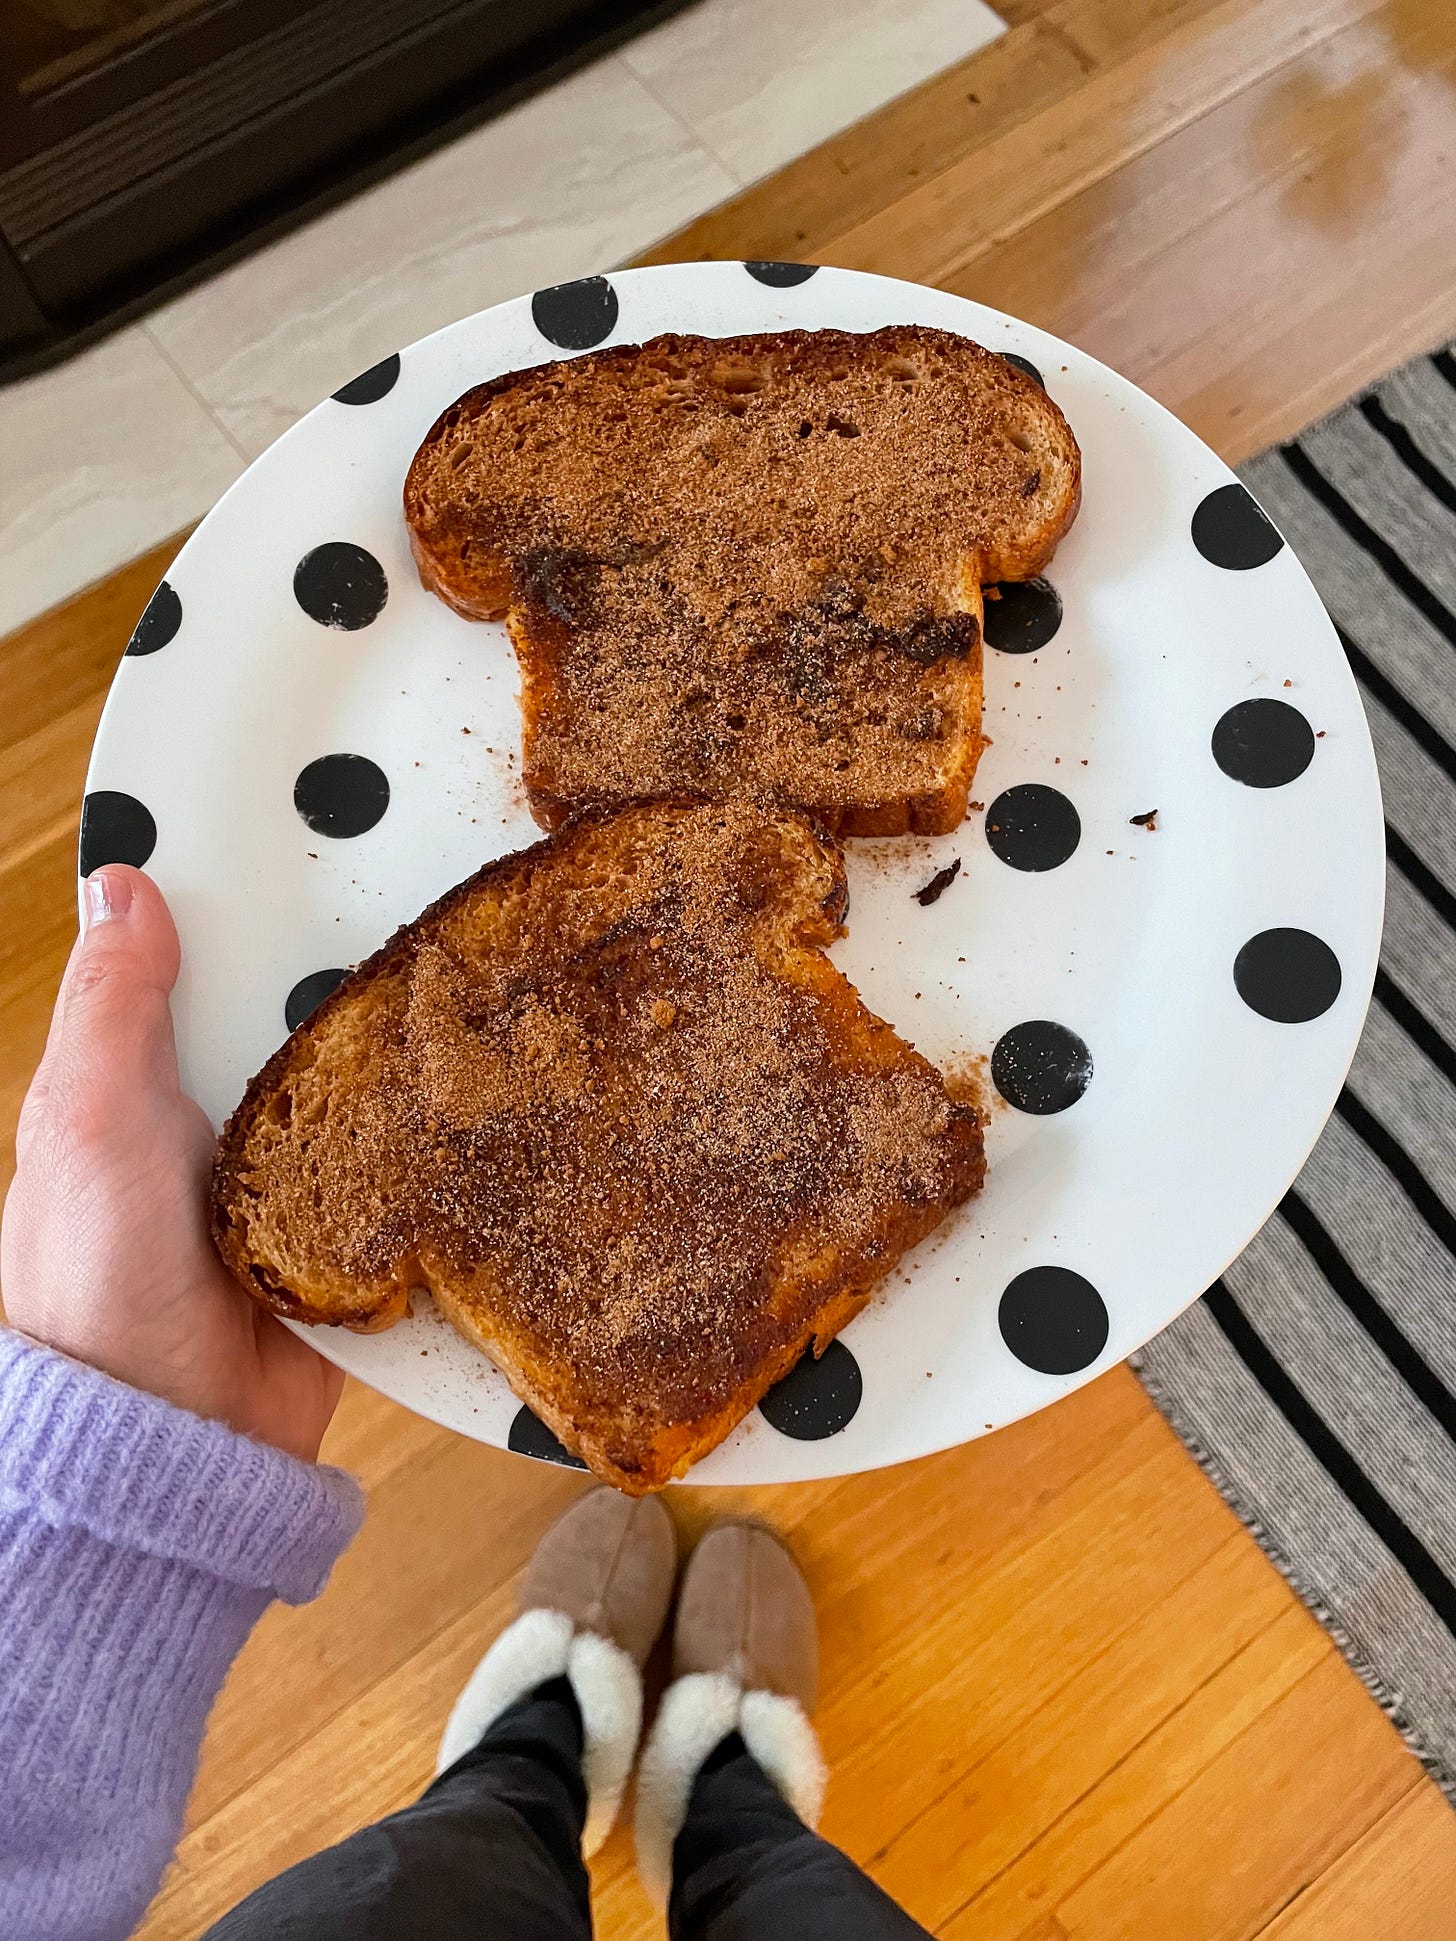 Spotty plate with two slices of milk bread which have been made into cinnamon toast. It's being held by a woman wearing a purple cardigan, track pants and ugg boots at home in winter.